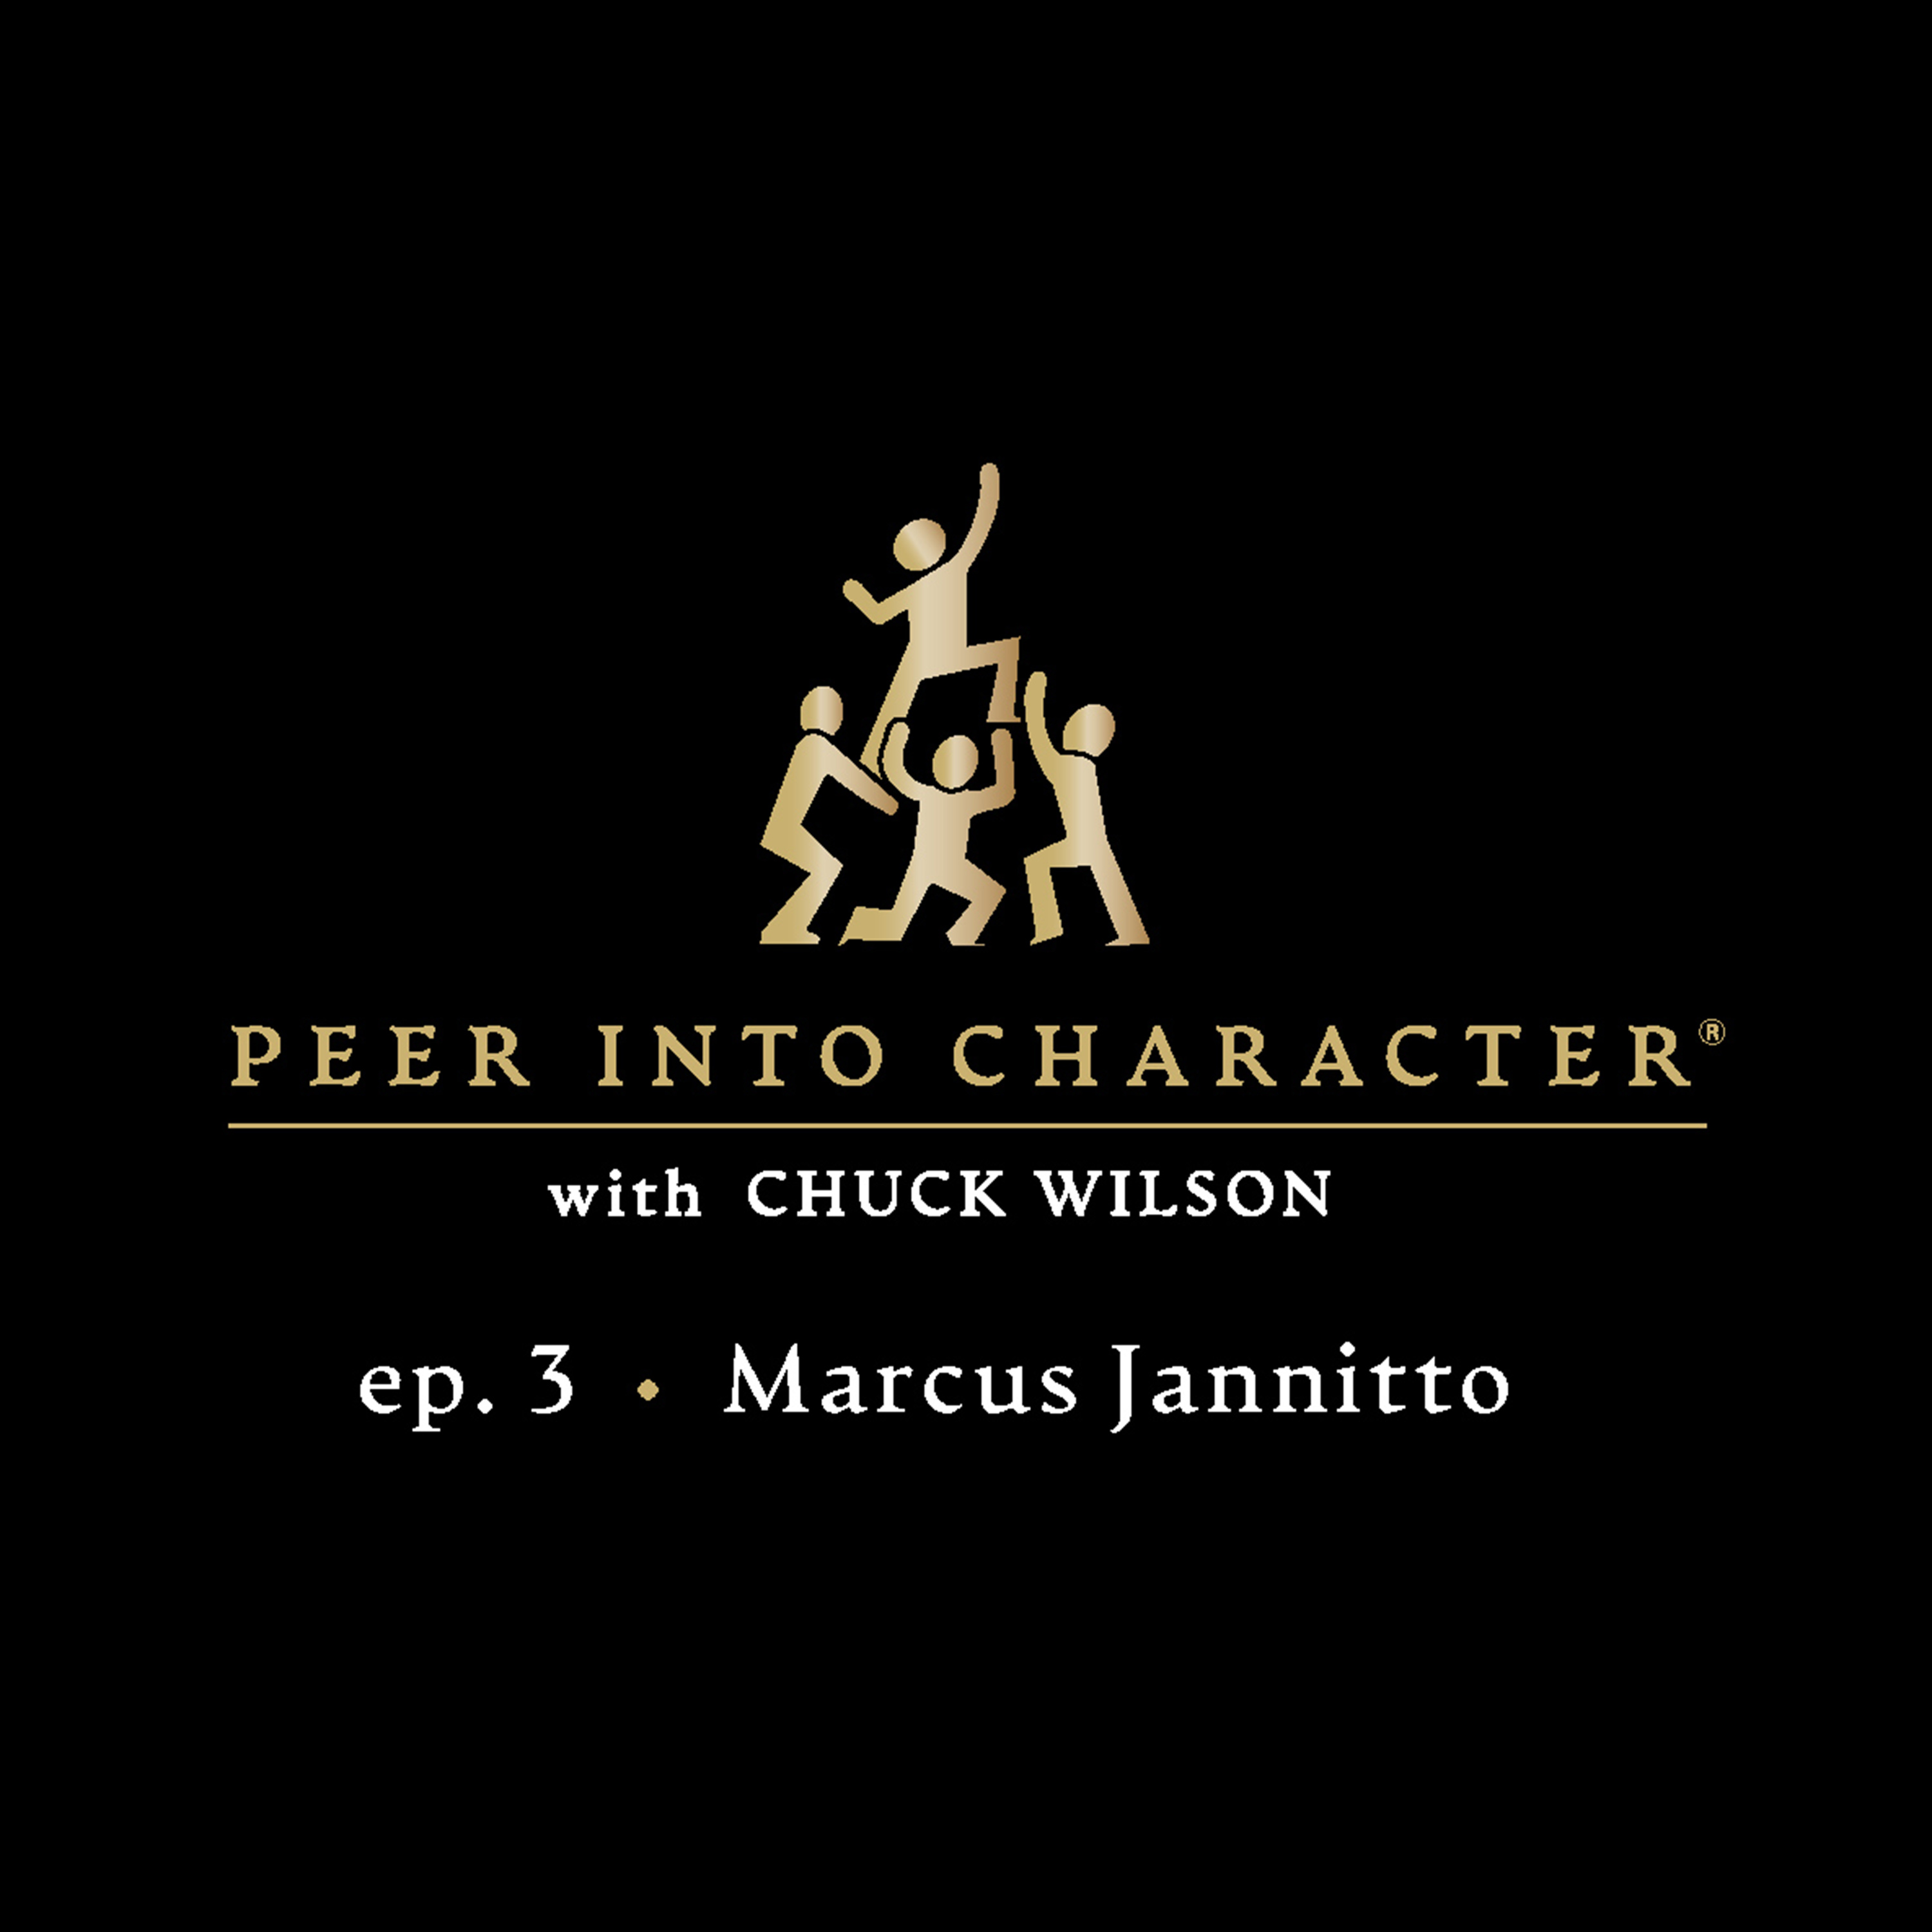 ep. 3: Marcus Jannitto on Leadership and Team Captains in Sports